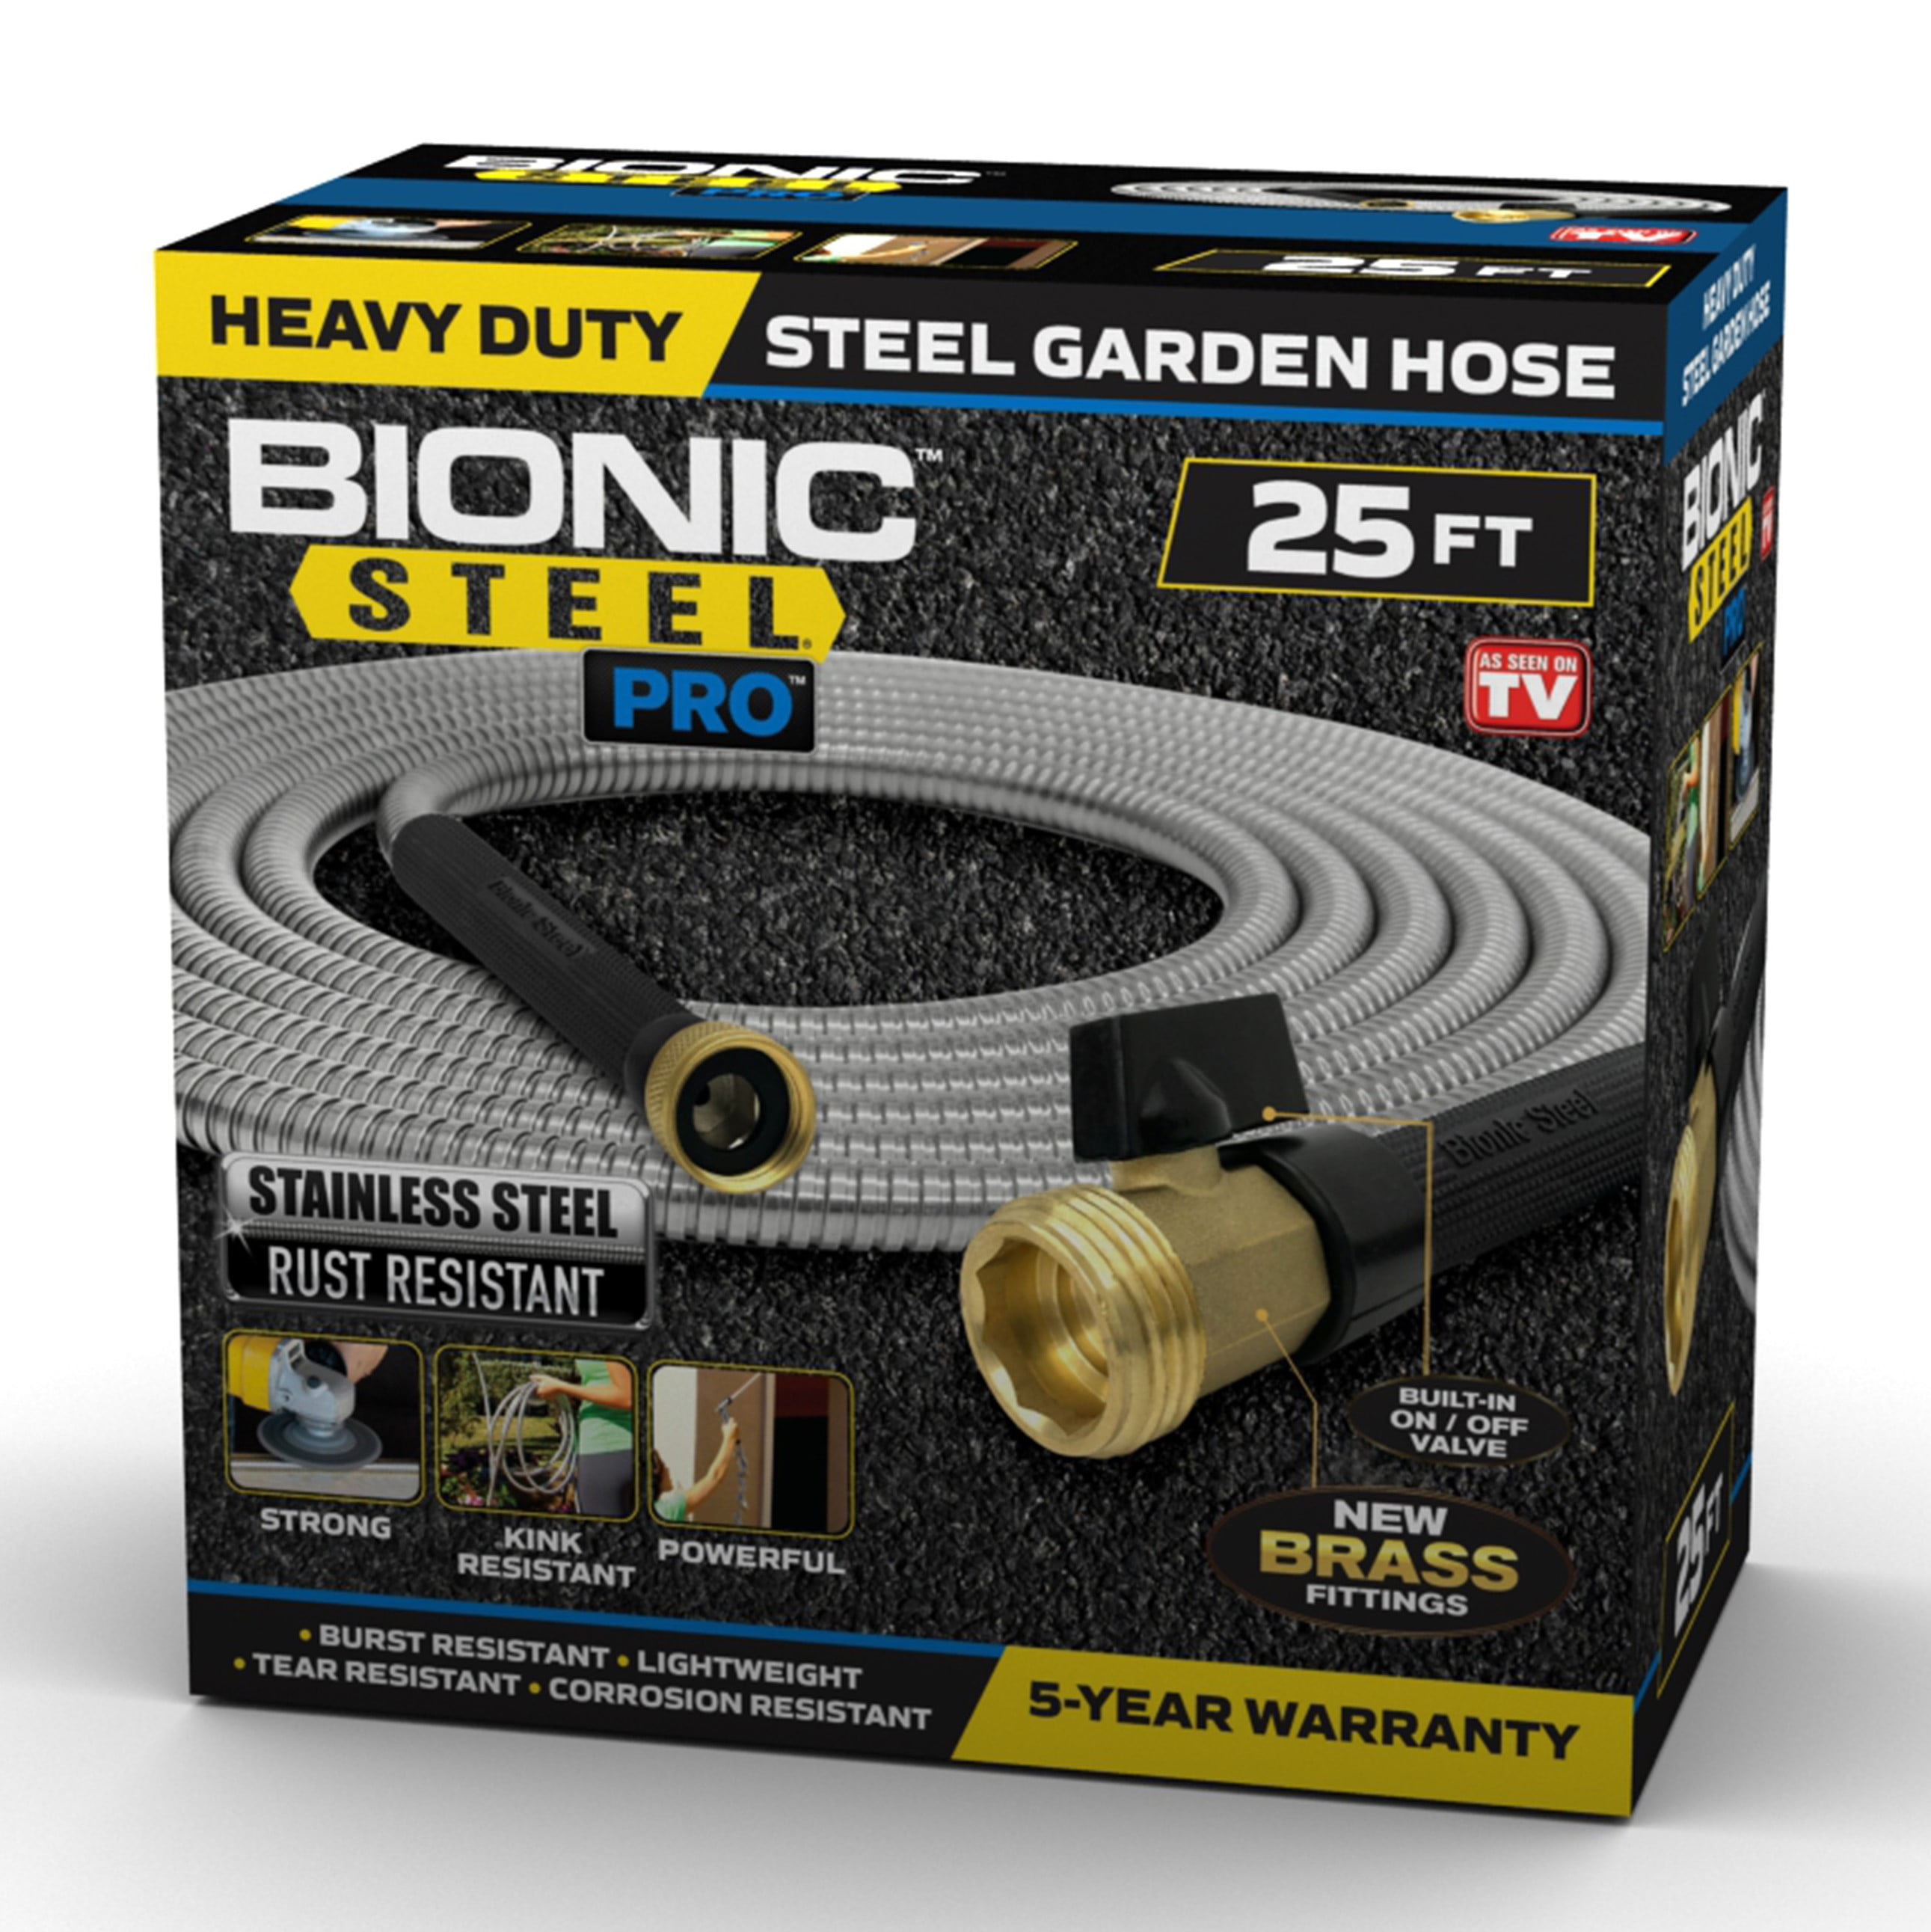 25 50 75 FT Flexible Garden Water Hose Stainless Steel Hose With Spray Nozzle 